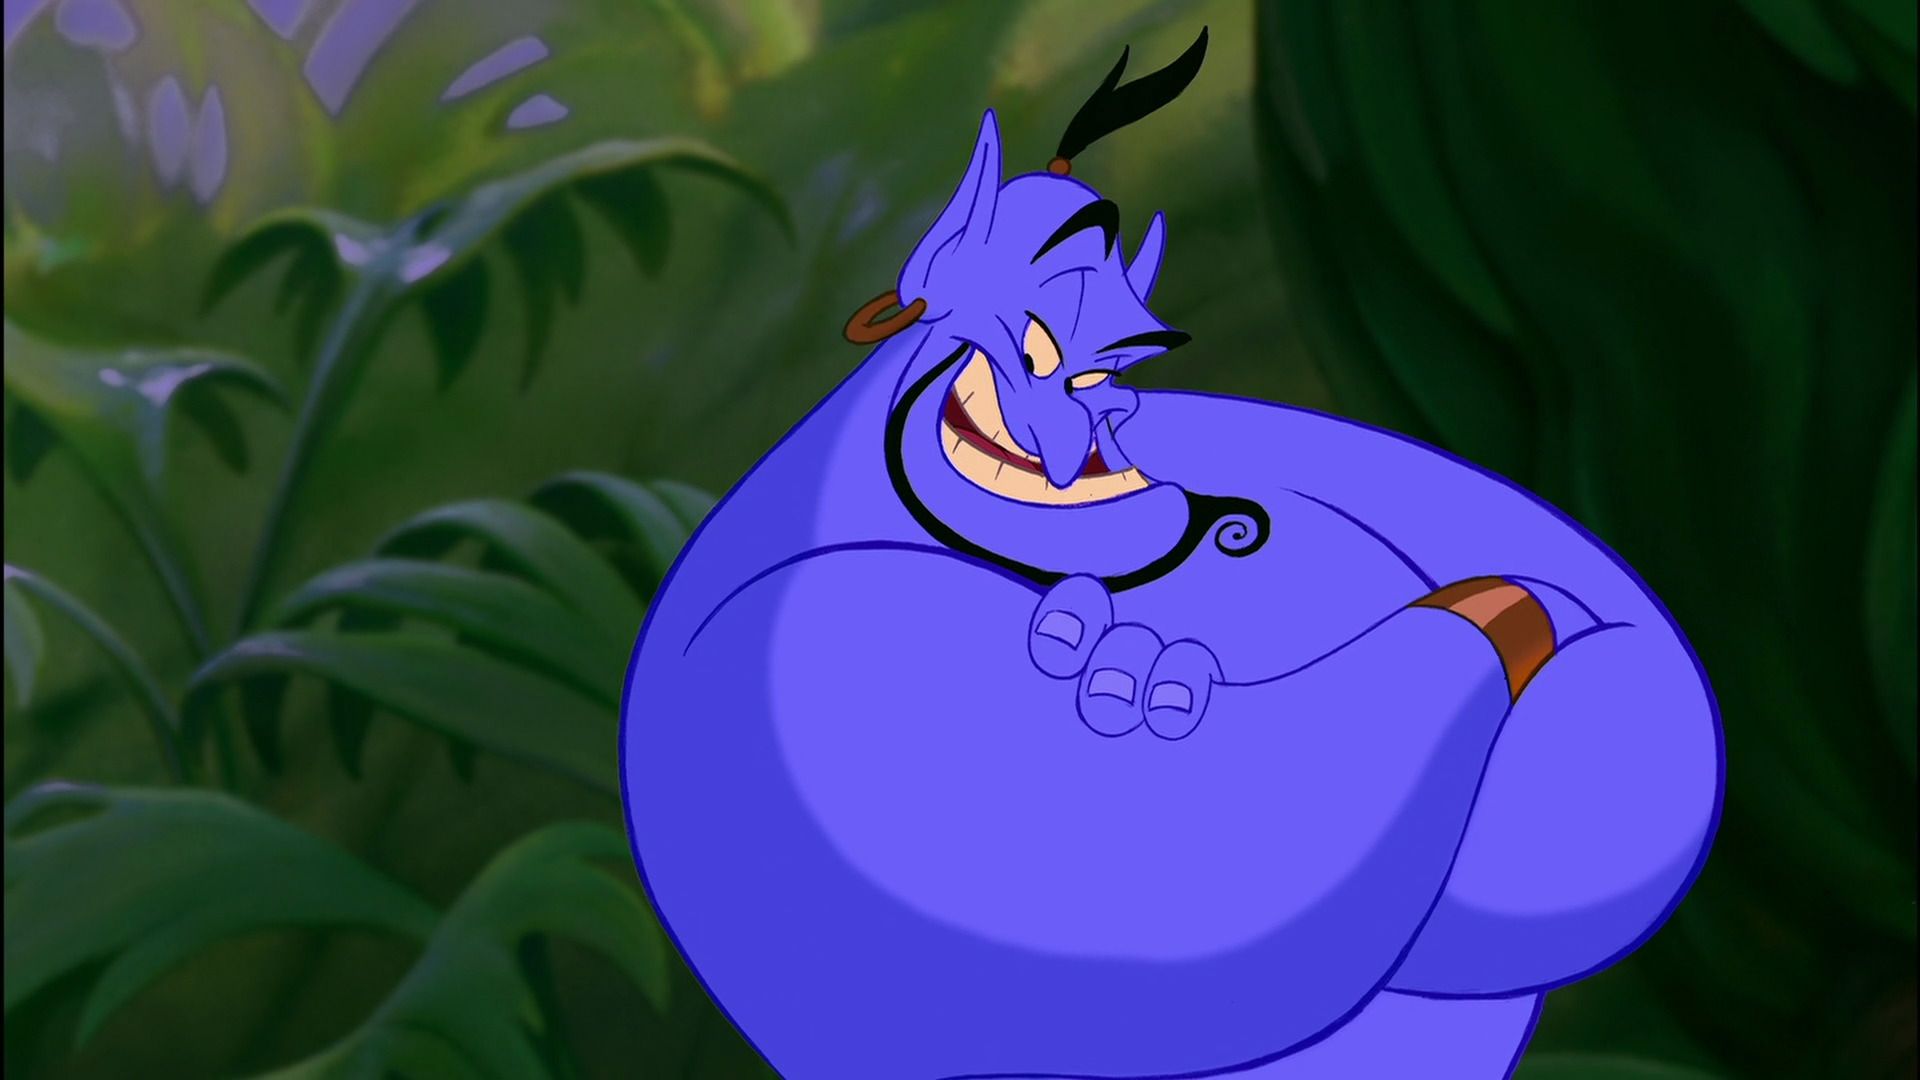 Robin Williams Genie Wont Be In Any More Aladdin Sequels Collider 